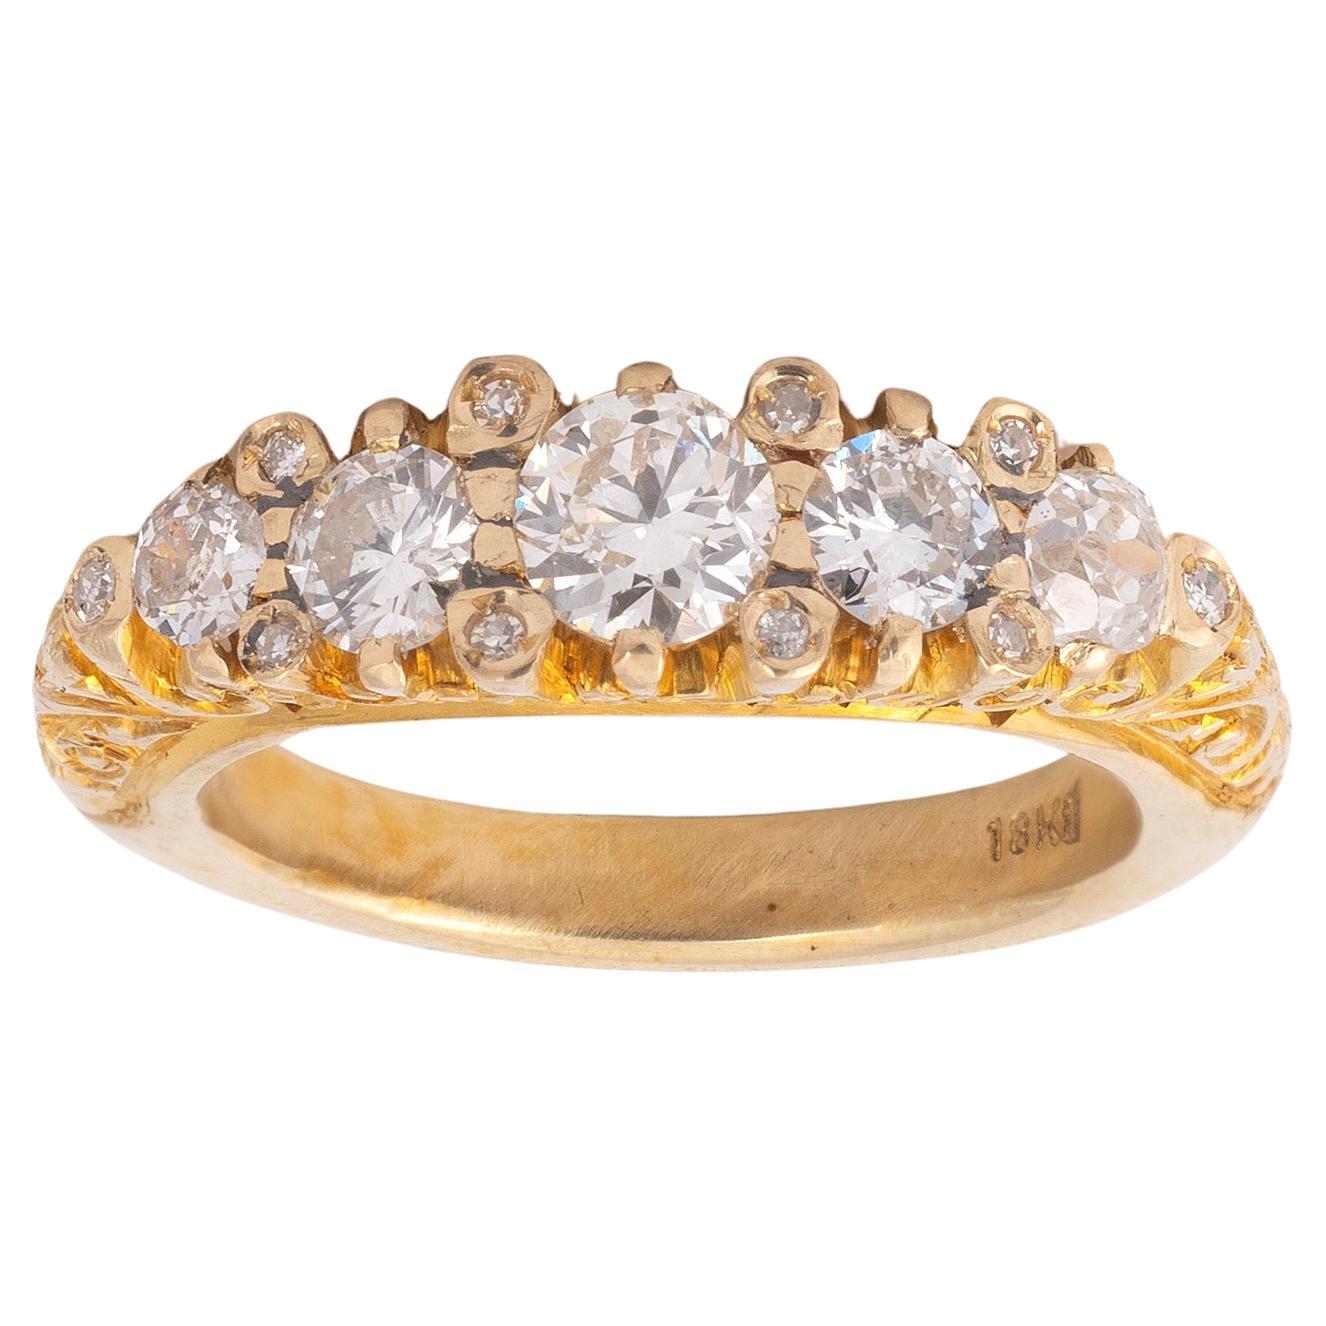 A Five-Stone Diamond Ring Early 20th Century For Sale